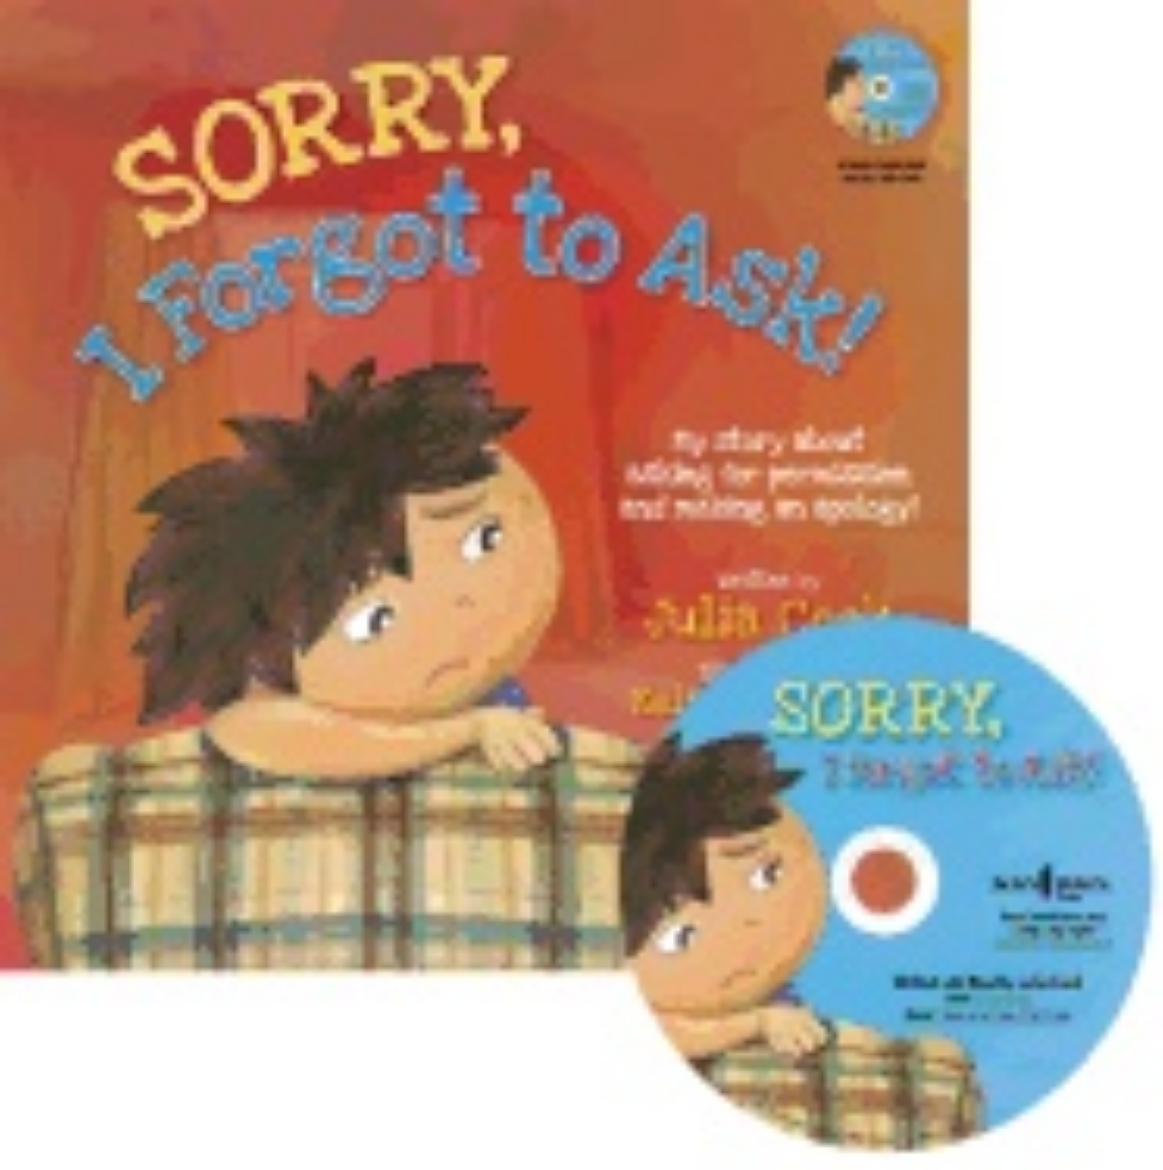 Picture of Sorry, I Forgot to Ask!: My Story about Asking Permission and Making an Apology! [With CD (Audio)]